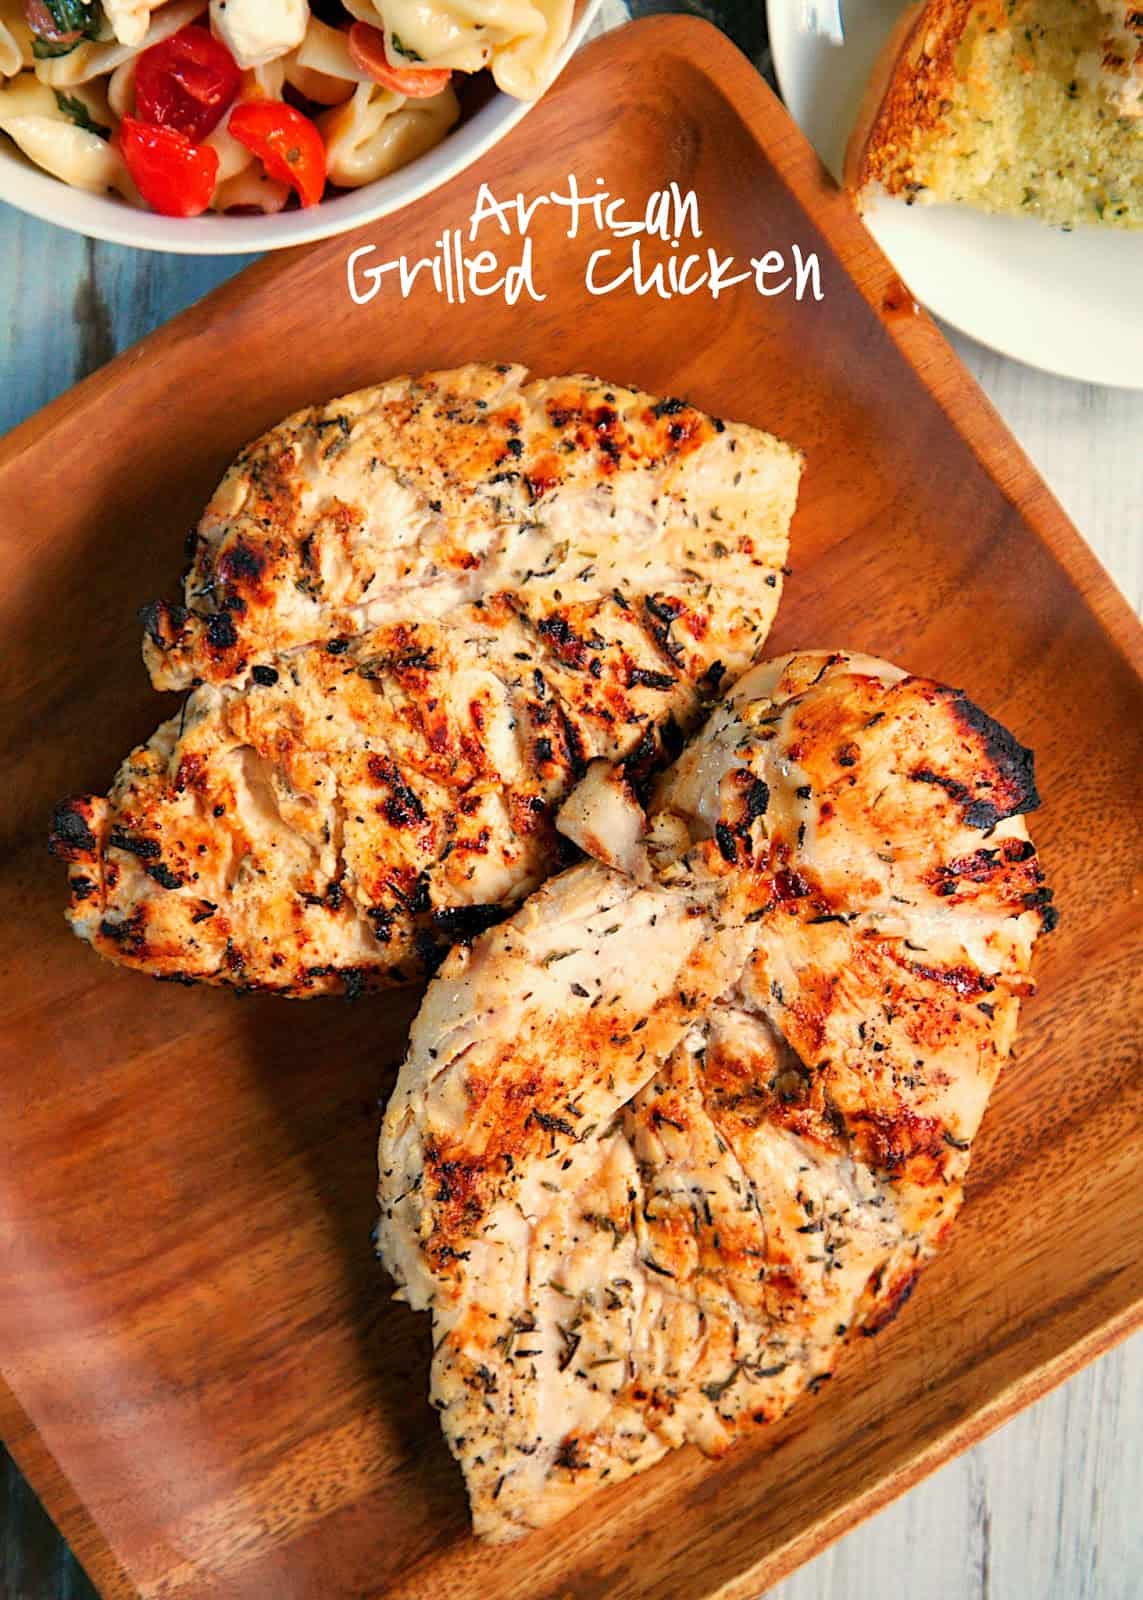 Artisan Grilled Chicken Recipe - chicken marinated in garlic, onion, thyme, sugar, salt, honey and lemon juice - SO flavorful! LOVED the hint of sweetness from the honey. You may want to double the recipe for leftovers.